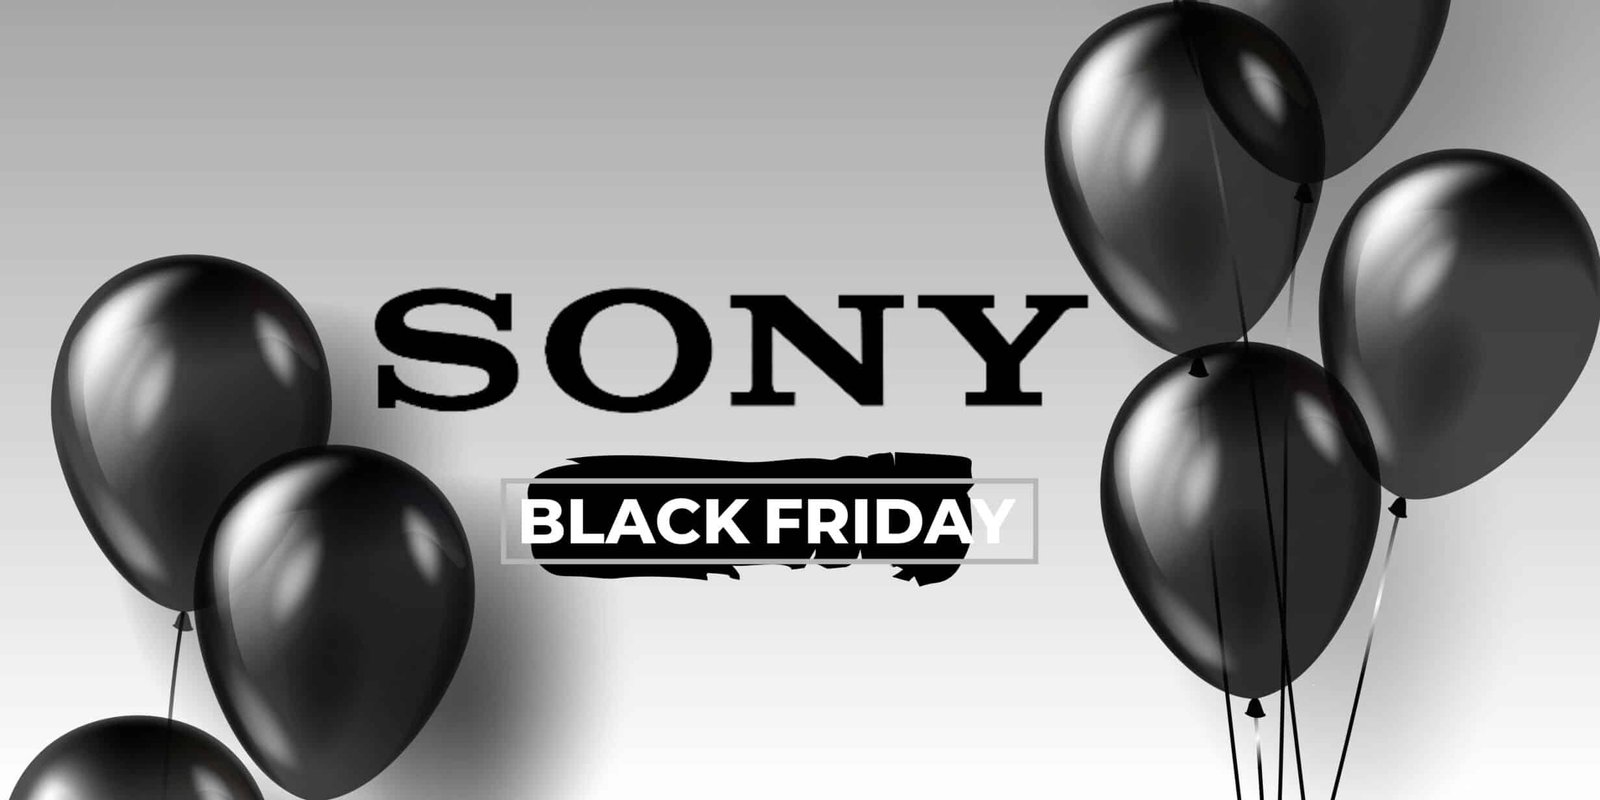 Sony offers top tire games and gadgets on the Black Friday Sale